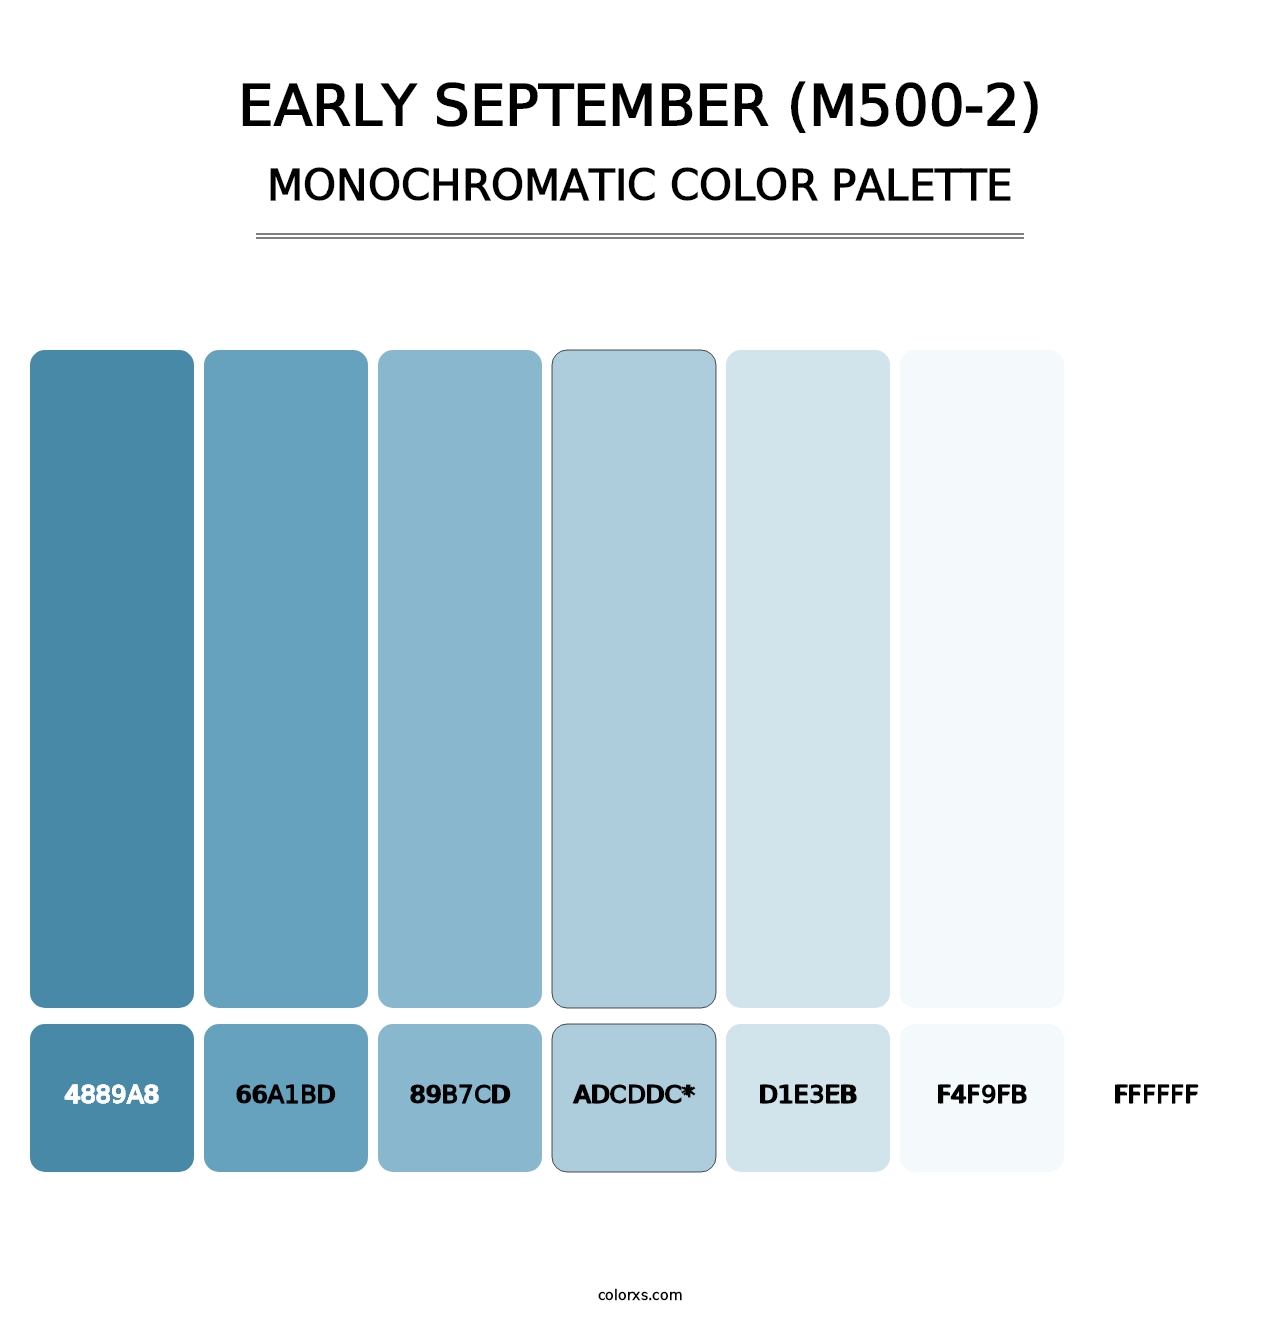 Early September (M500-2) - Monochromatic Color Palette